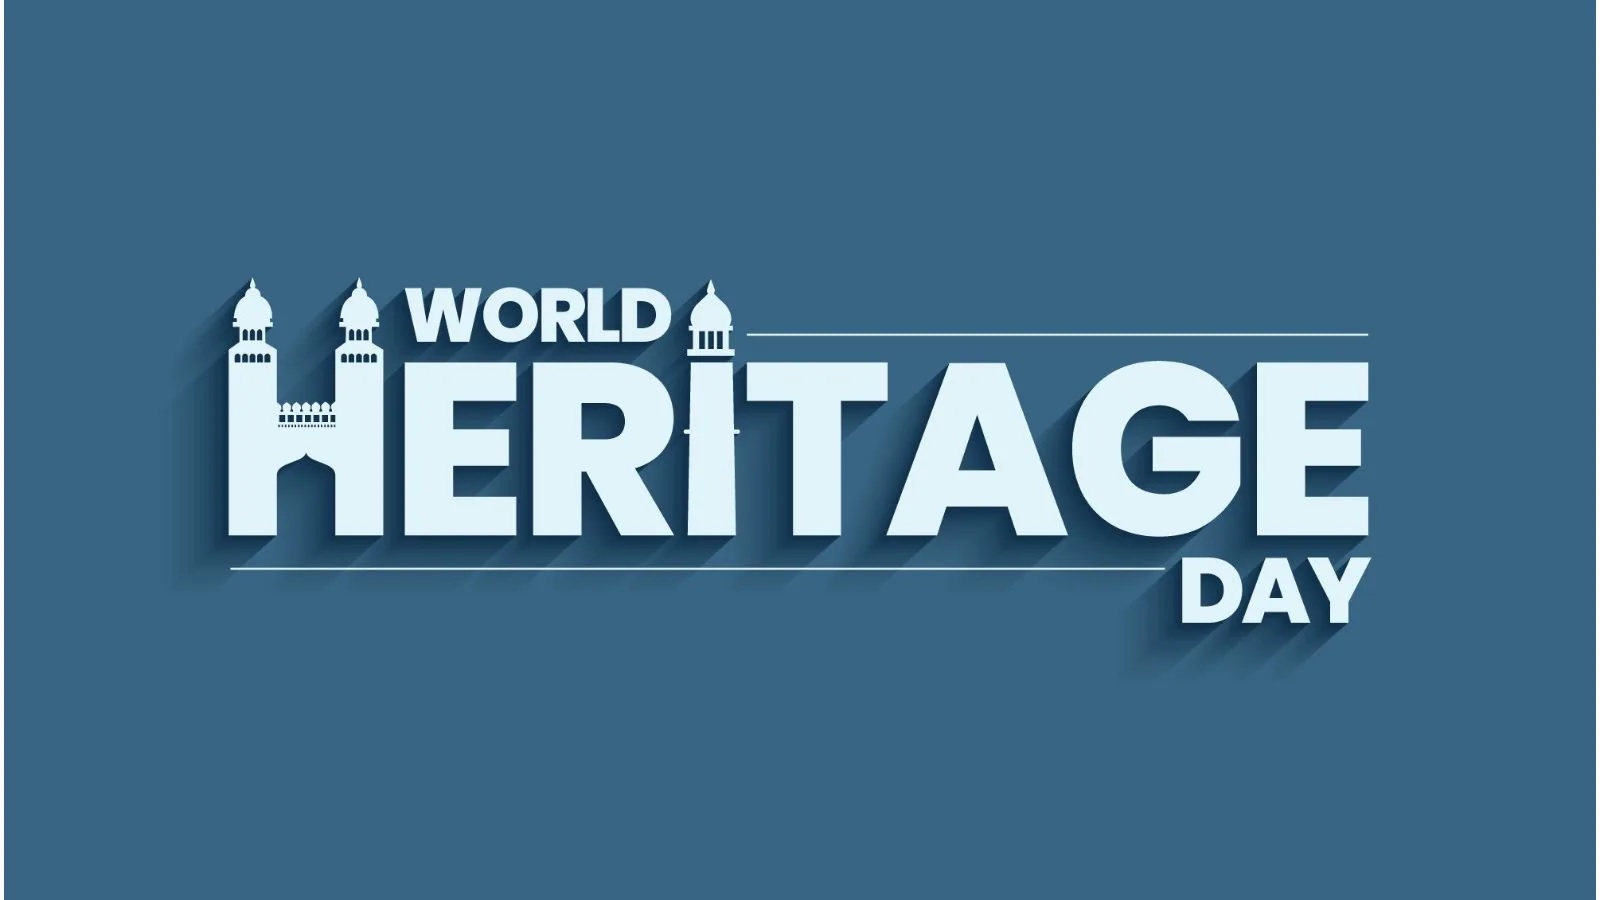 WORLD HERITAGE DAY IN TAMIL